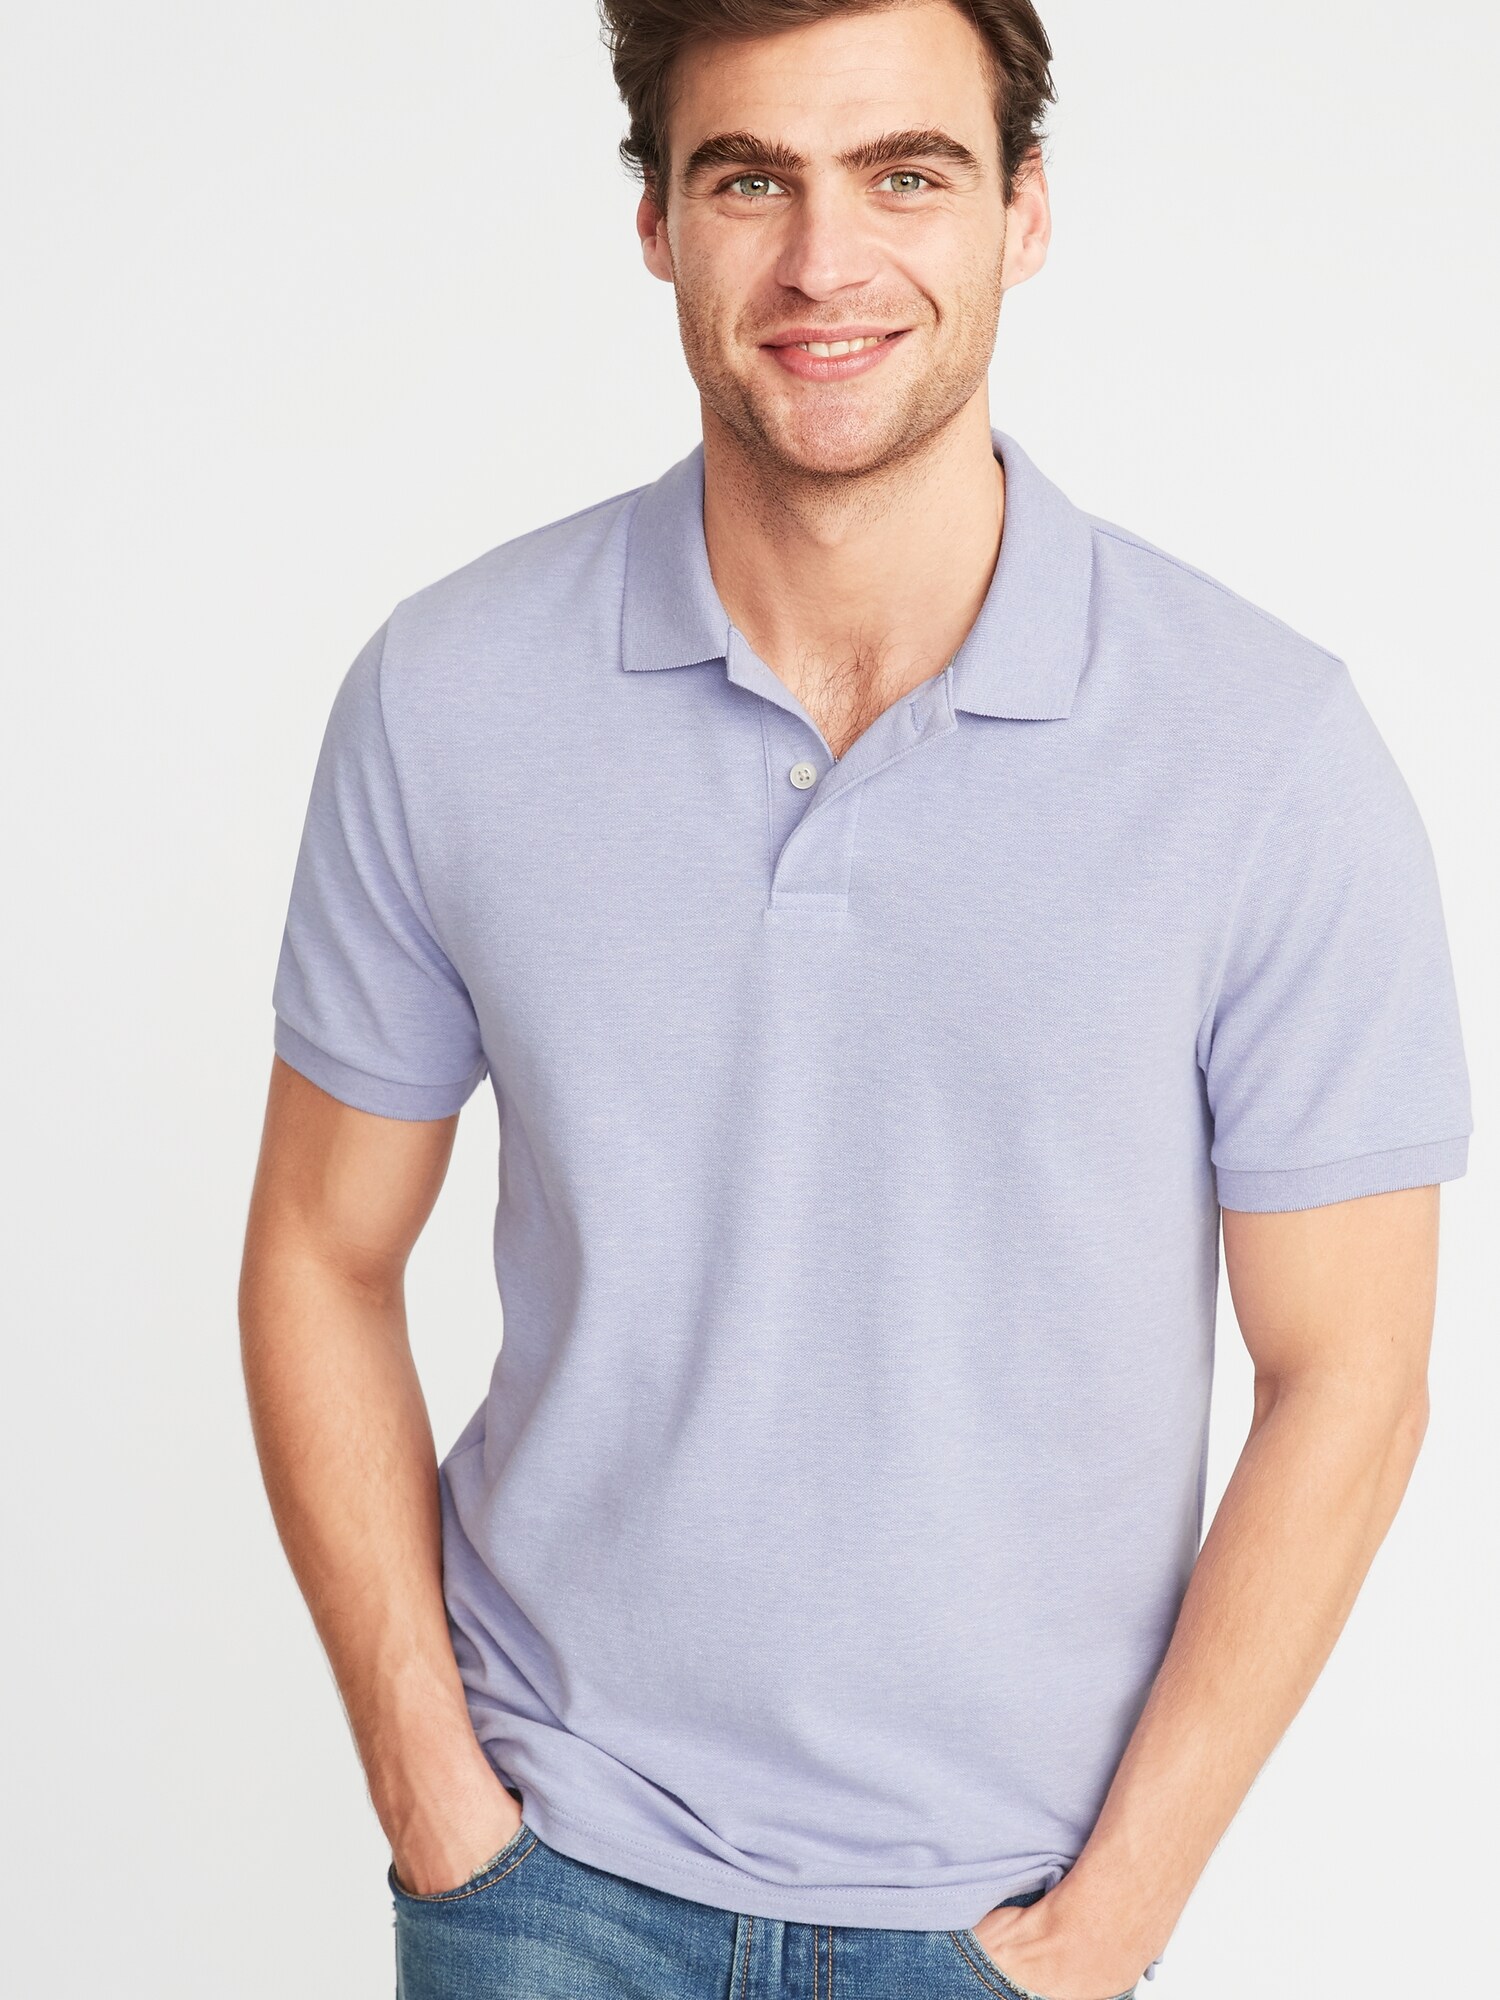 Moisture-Wicking Pro Polo for Men | Old Navy